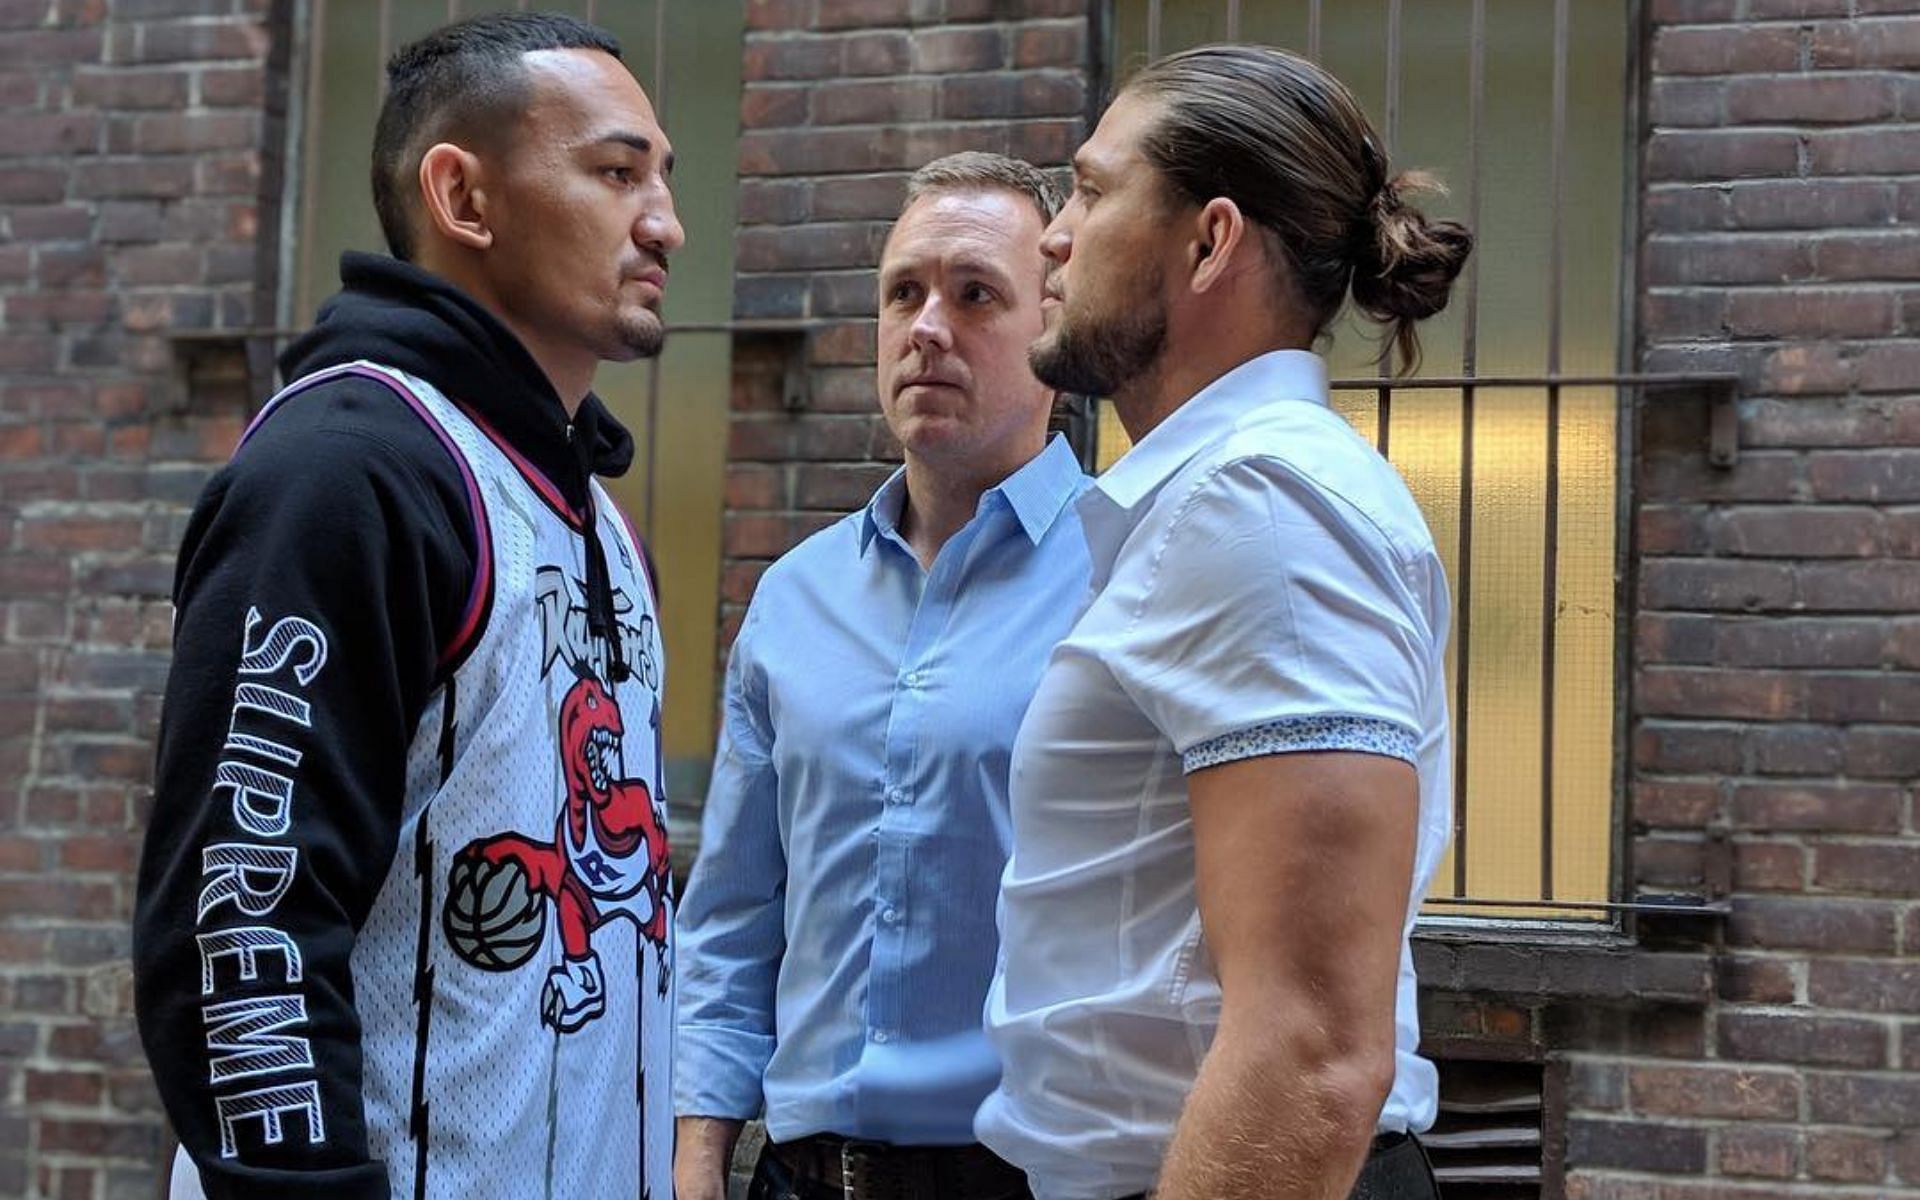 Watch When Max Holloway tried to teach Brian Ortega how to block